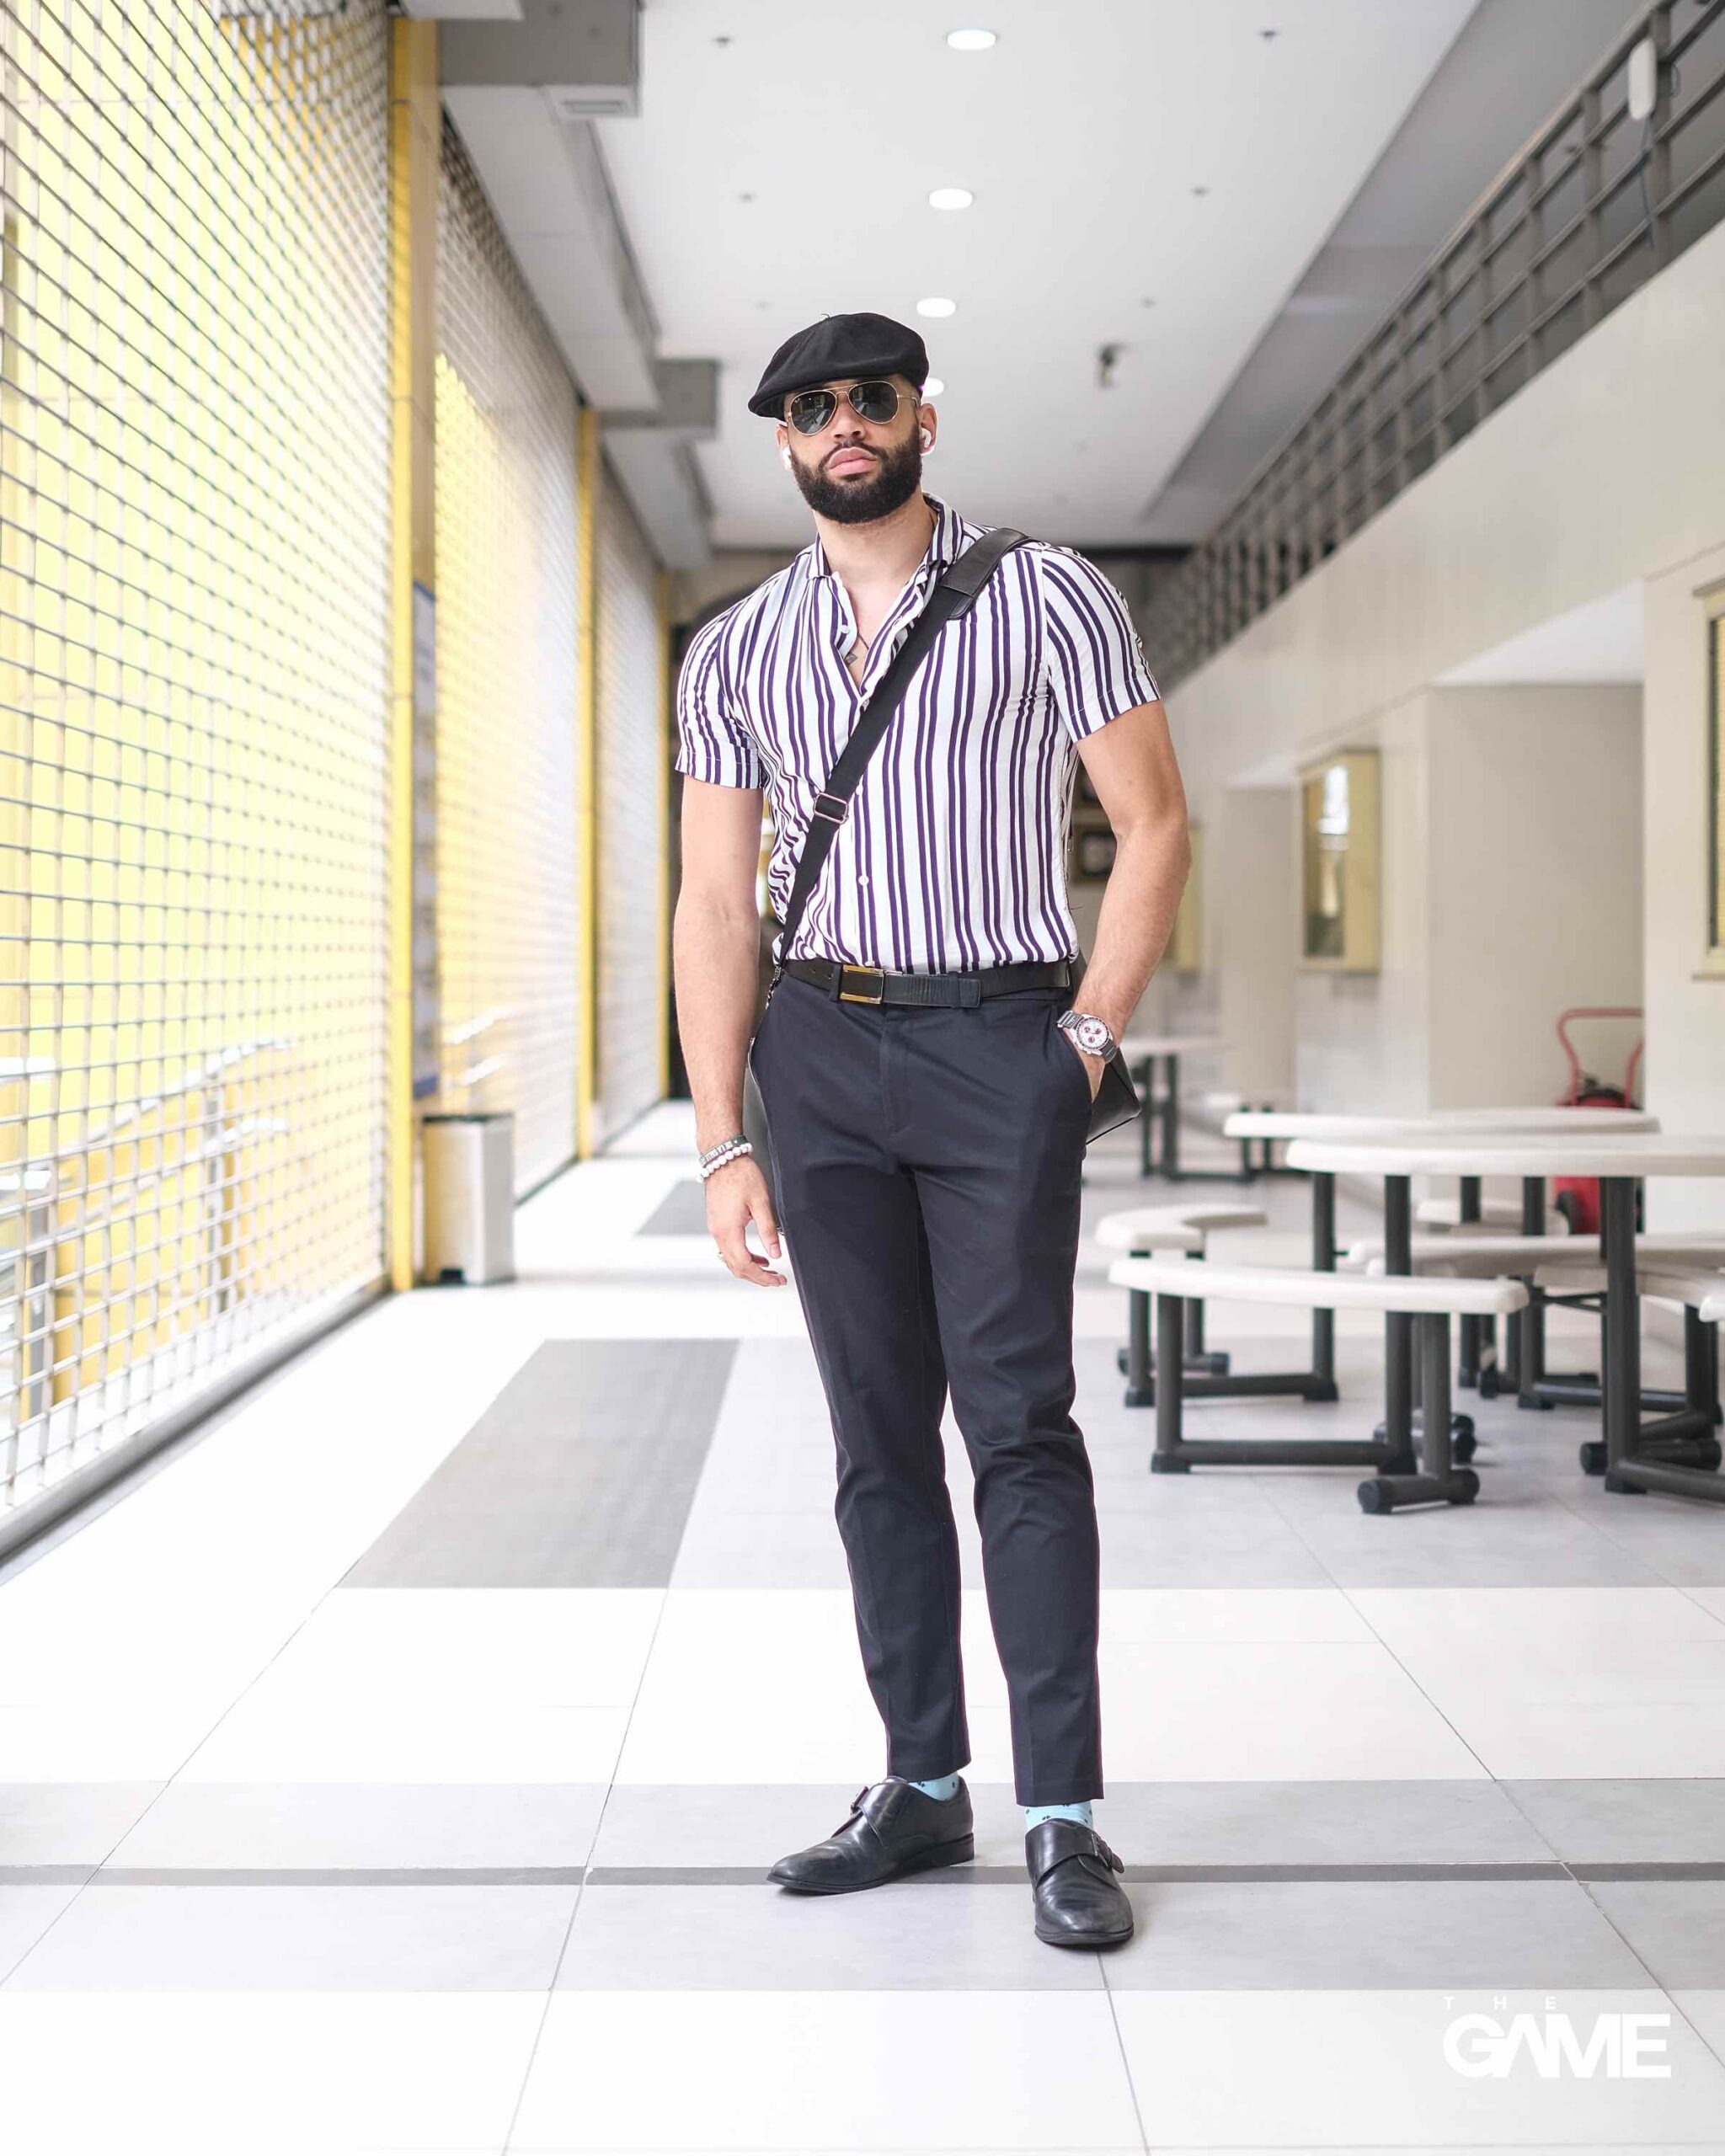 The GAME Tunnel Vision: Ben Phillips Outfits